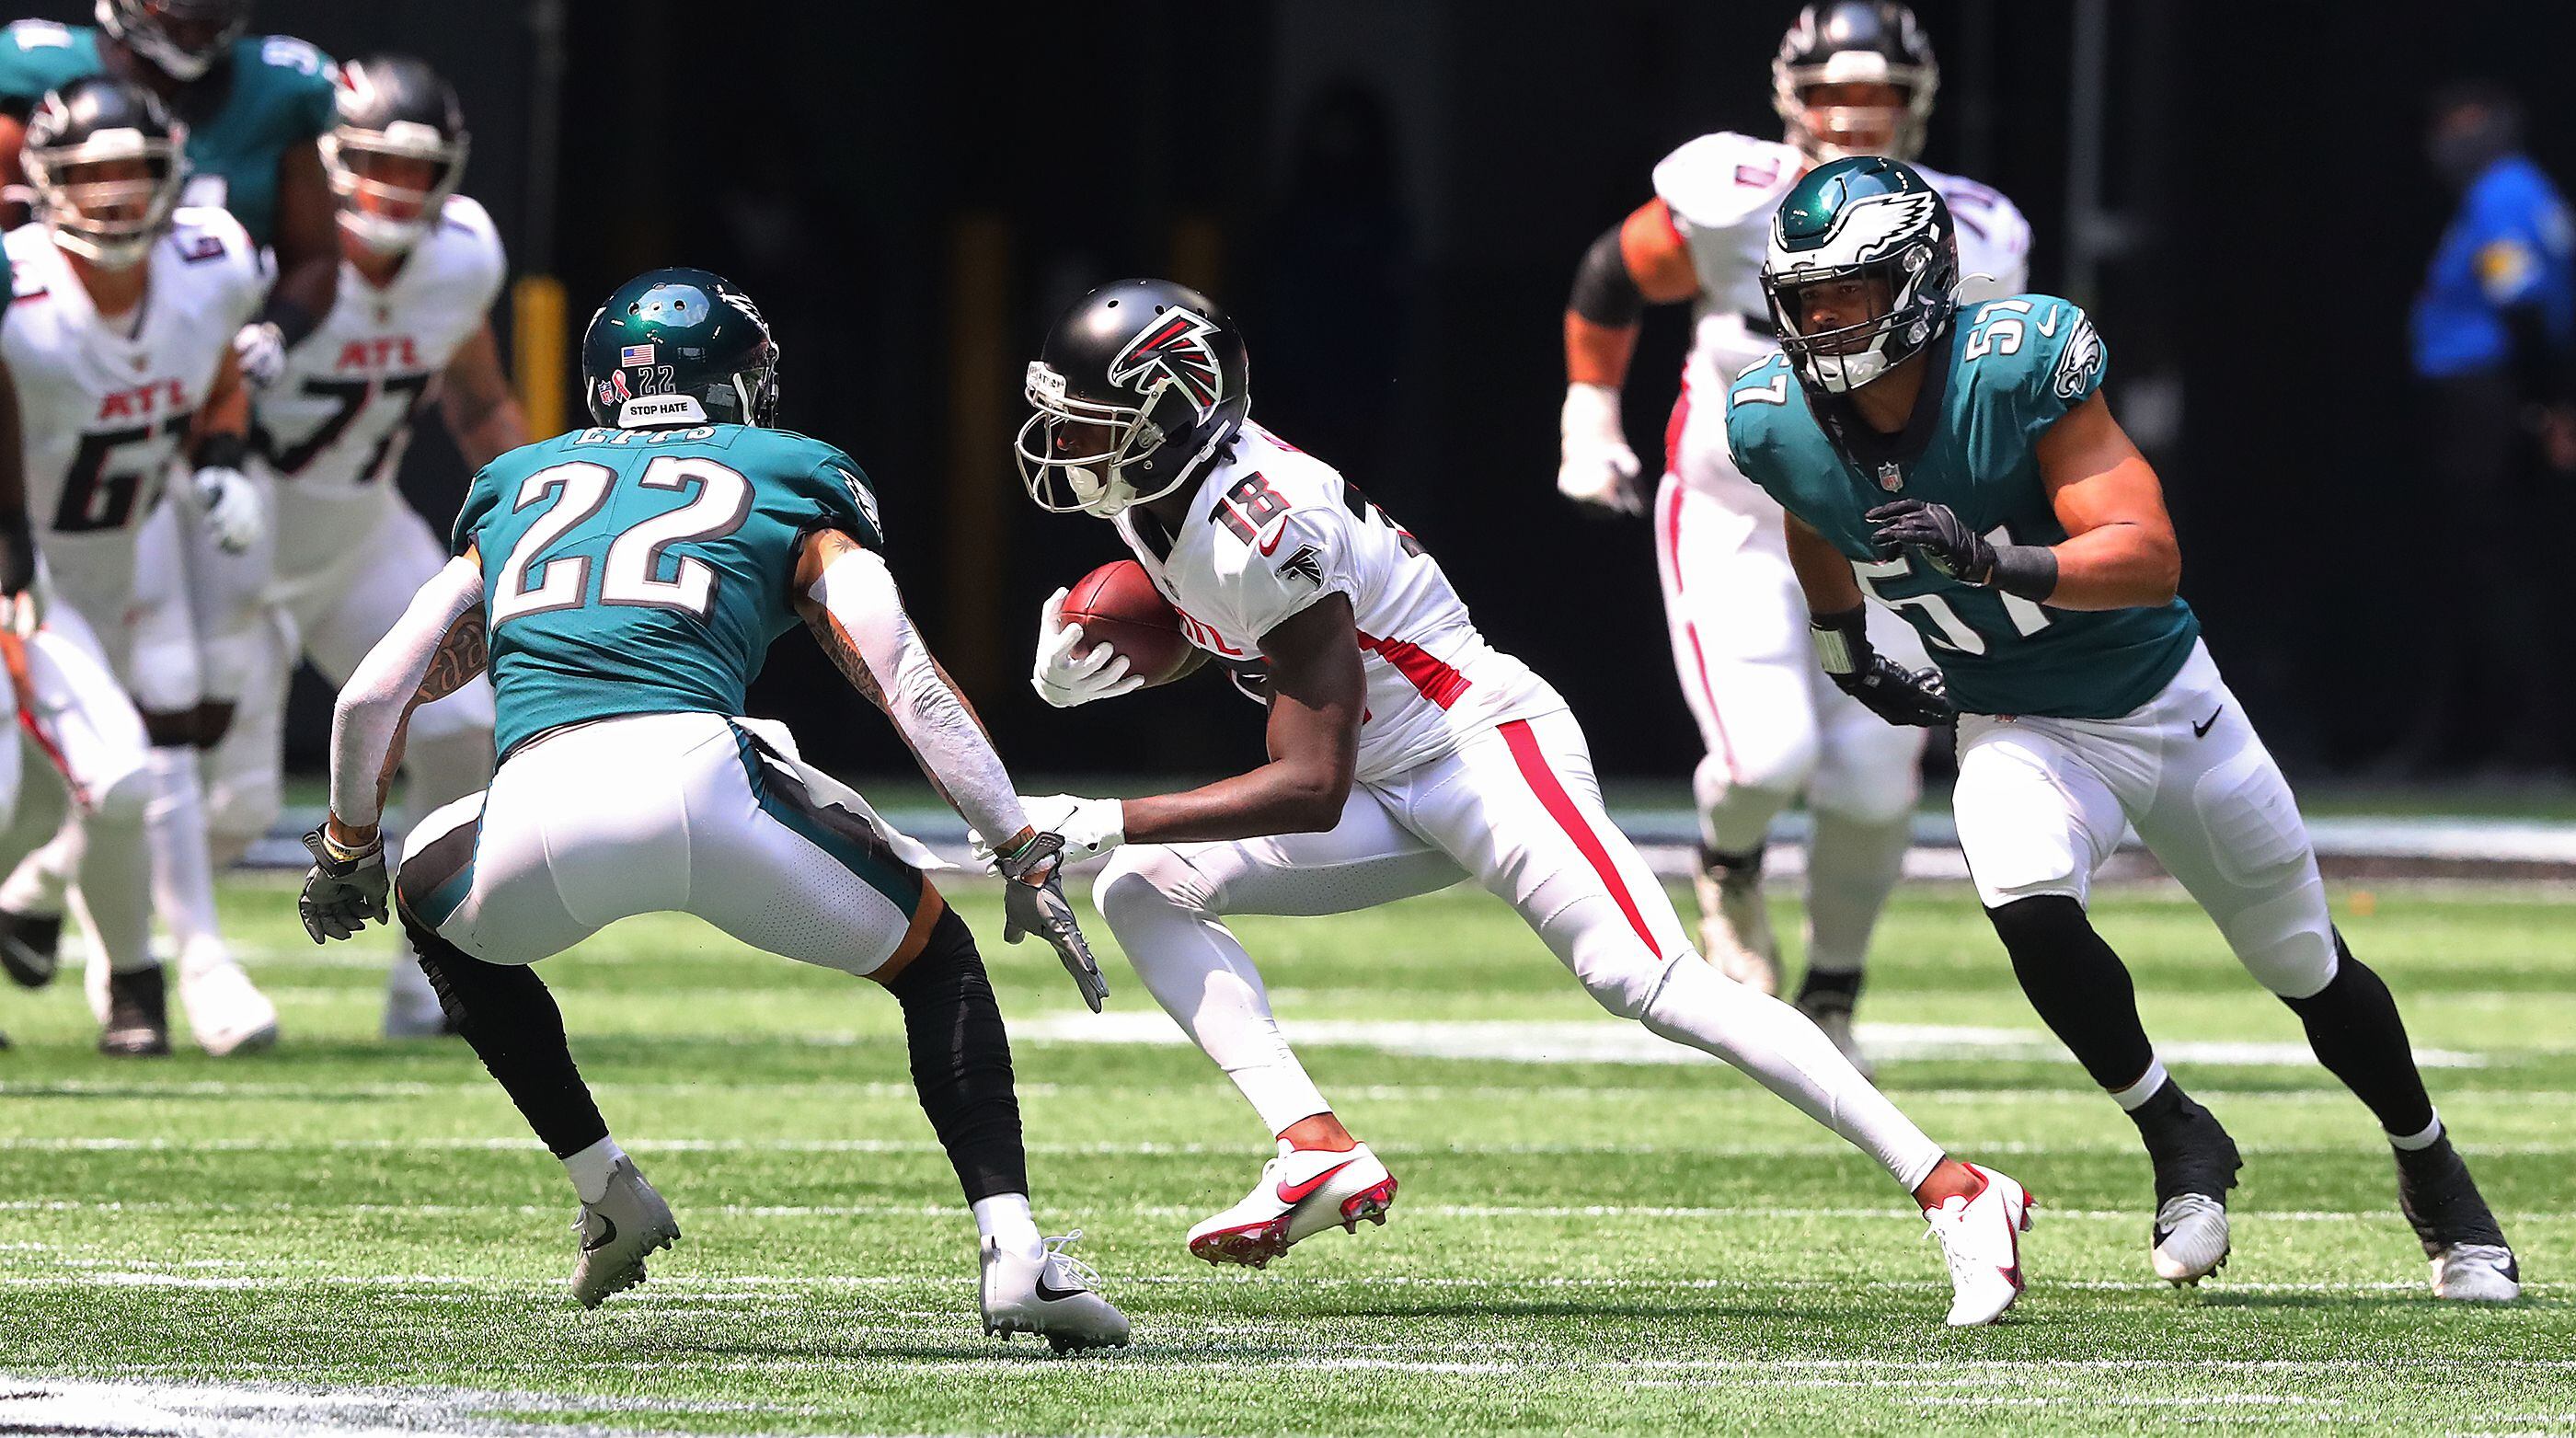 Eagles resurrect Philly Special to spark offense against Falcons